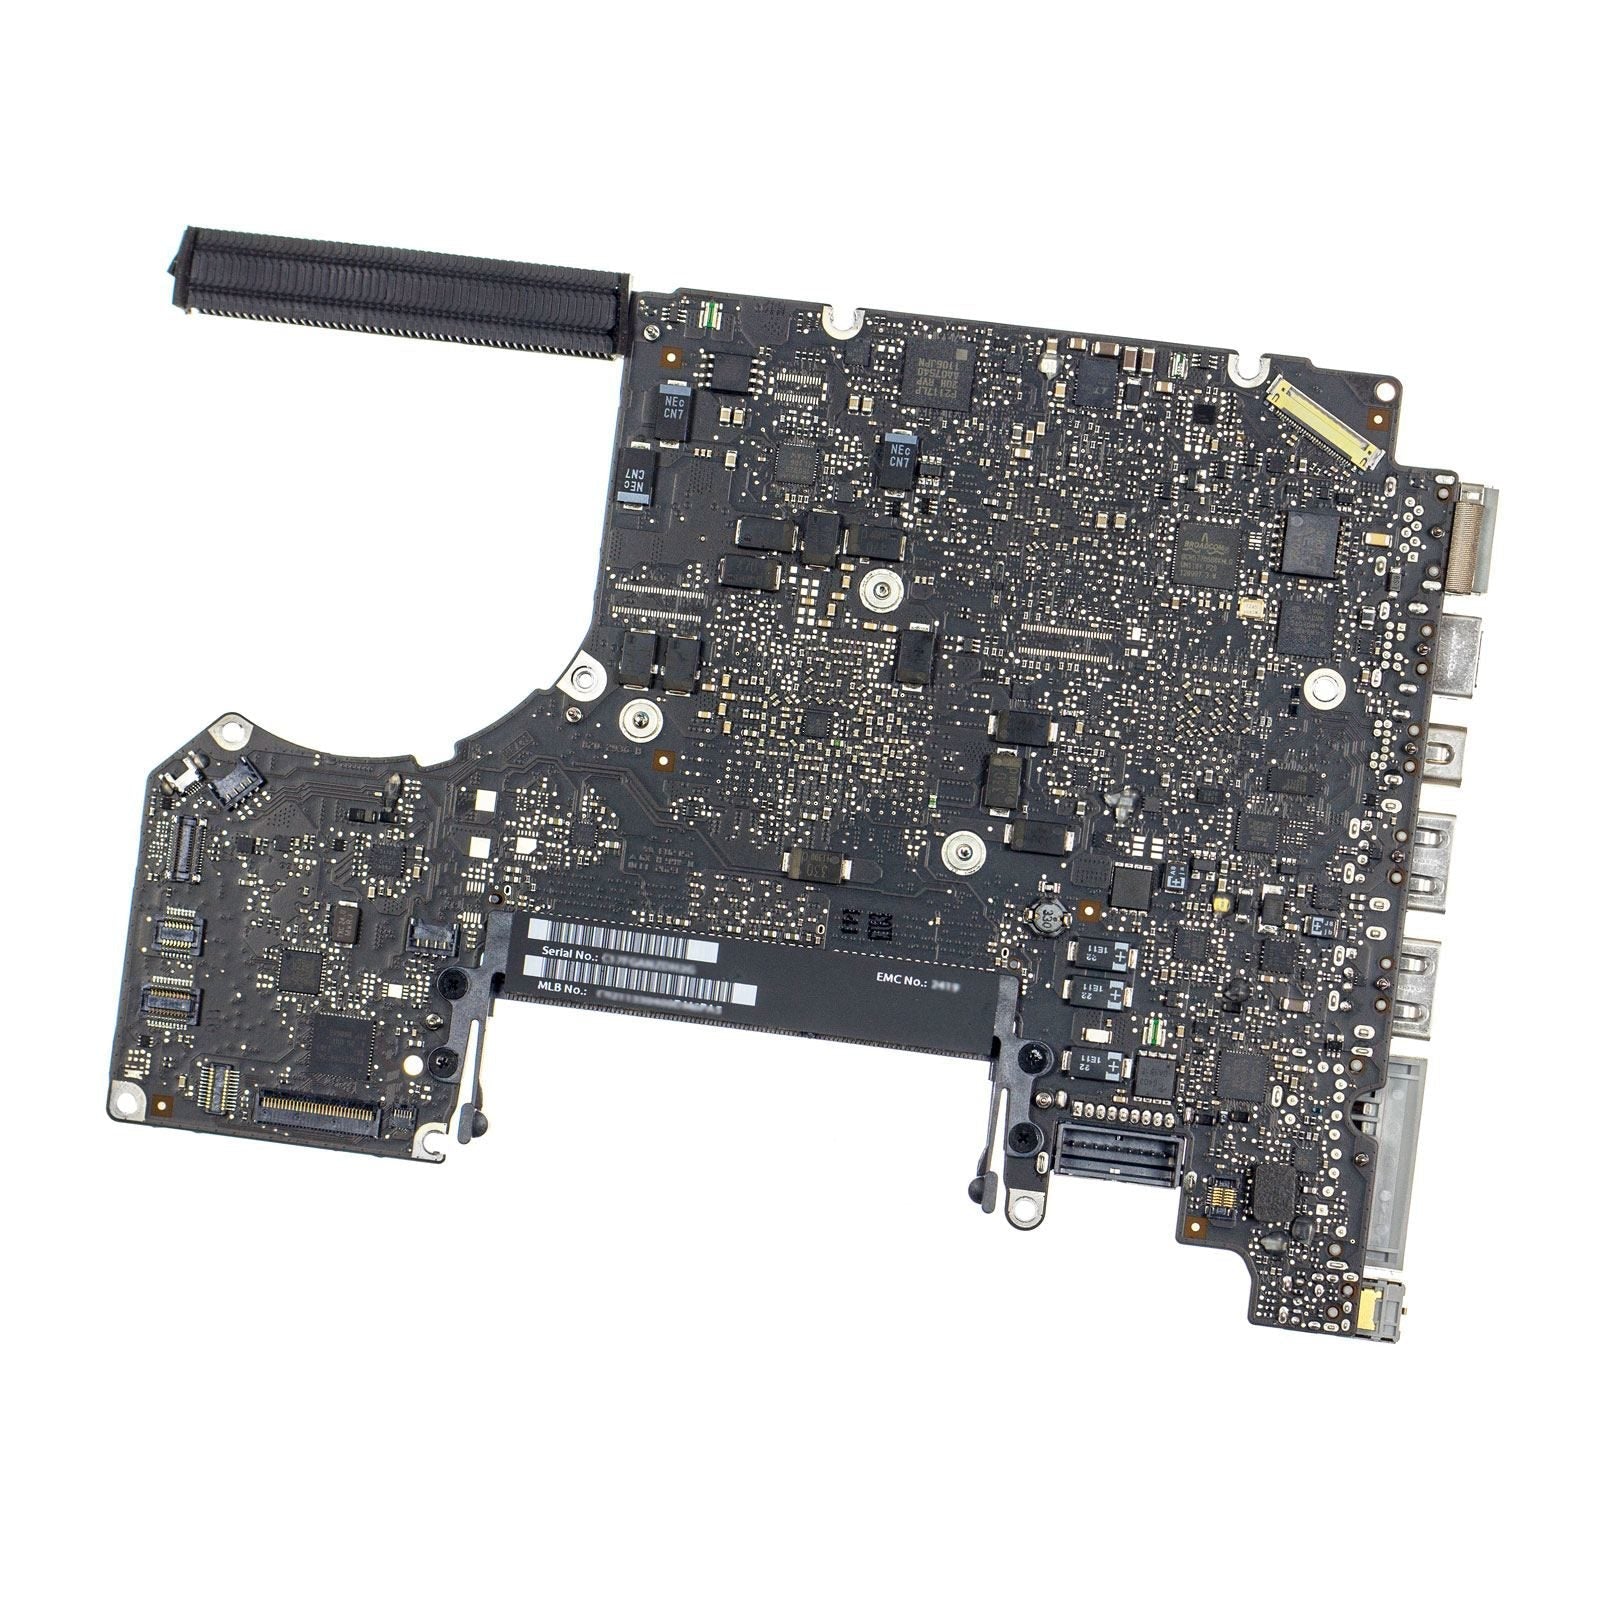 MOTHERBOARD FOR MACBOOK PRO 13" A1278 (EARLY 2011 - LATE 2011)